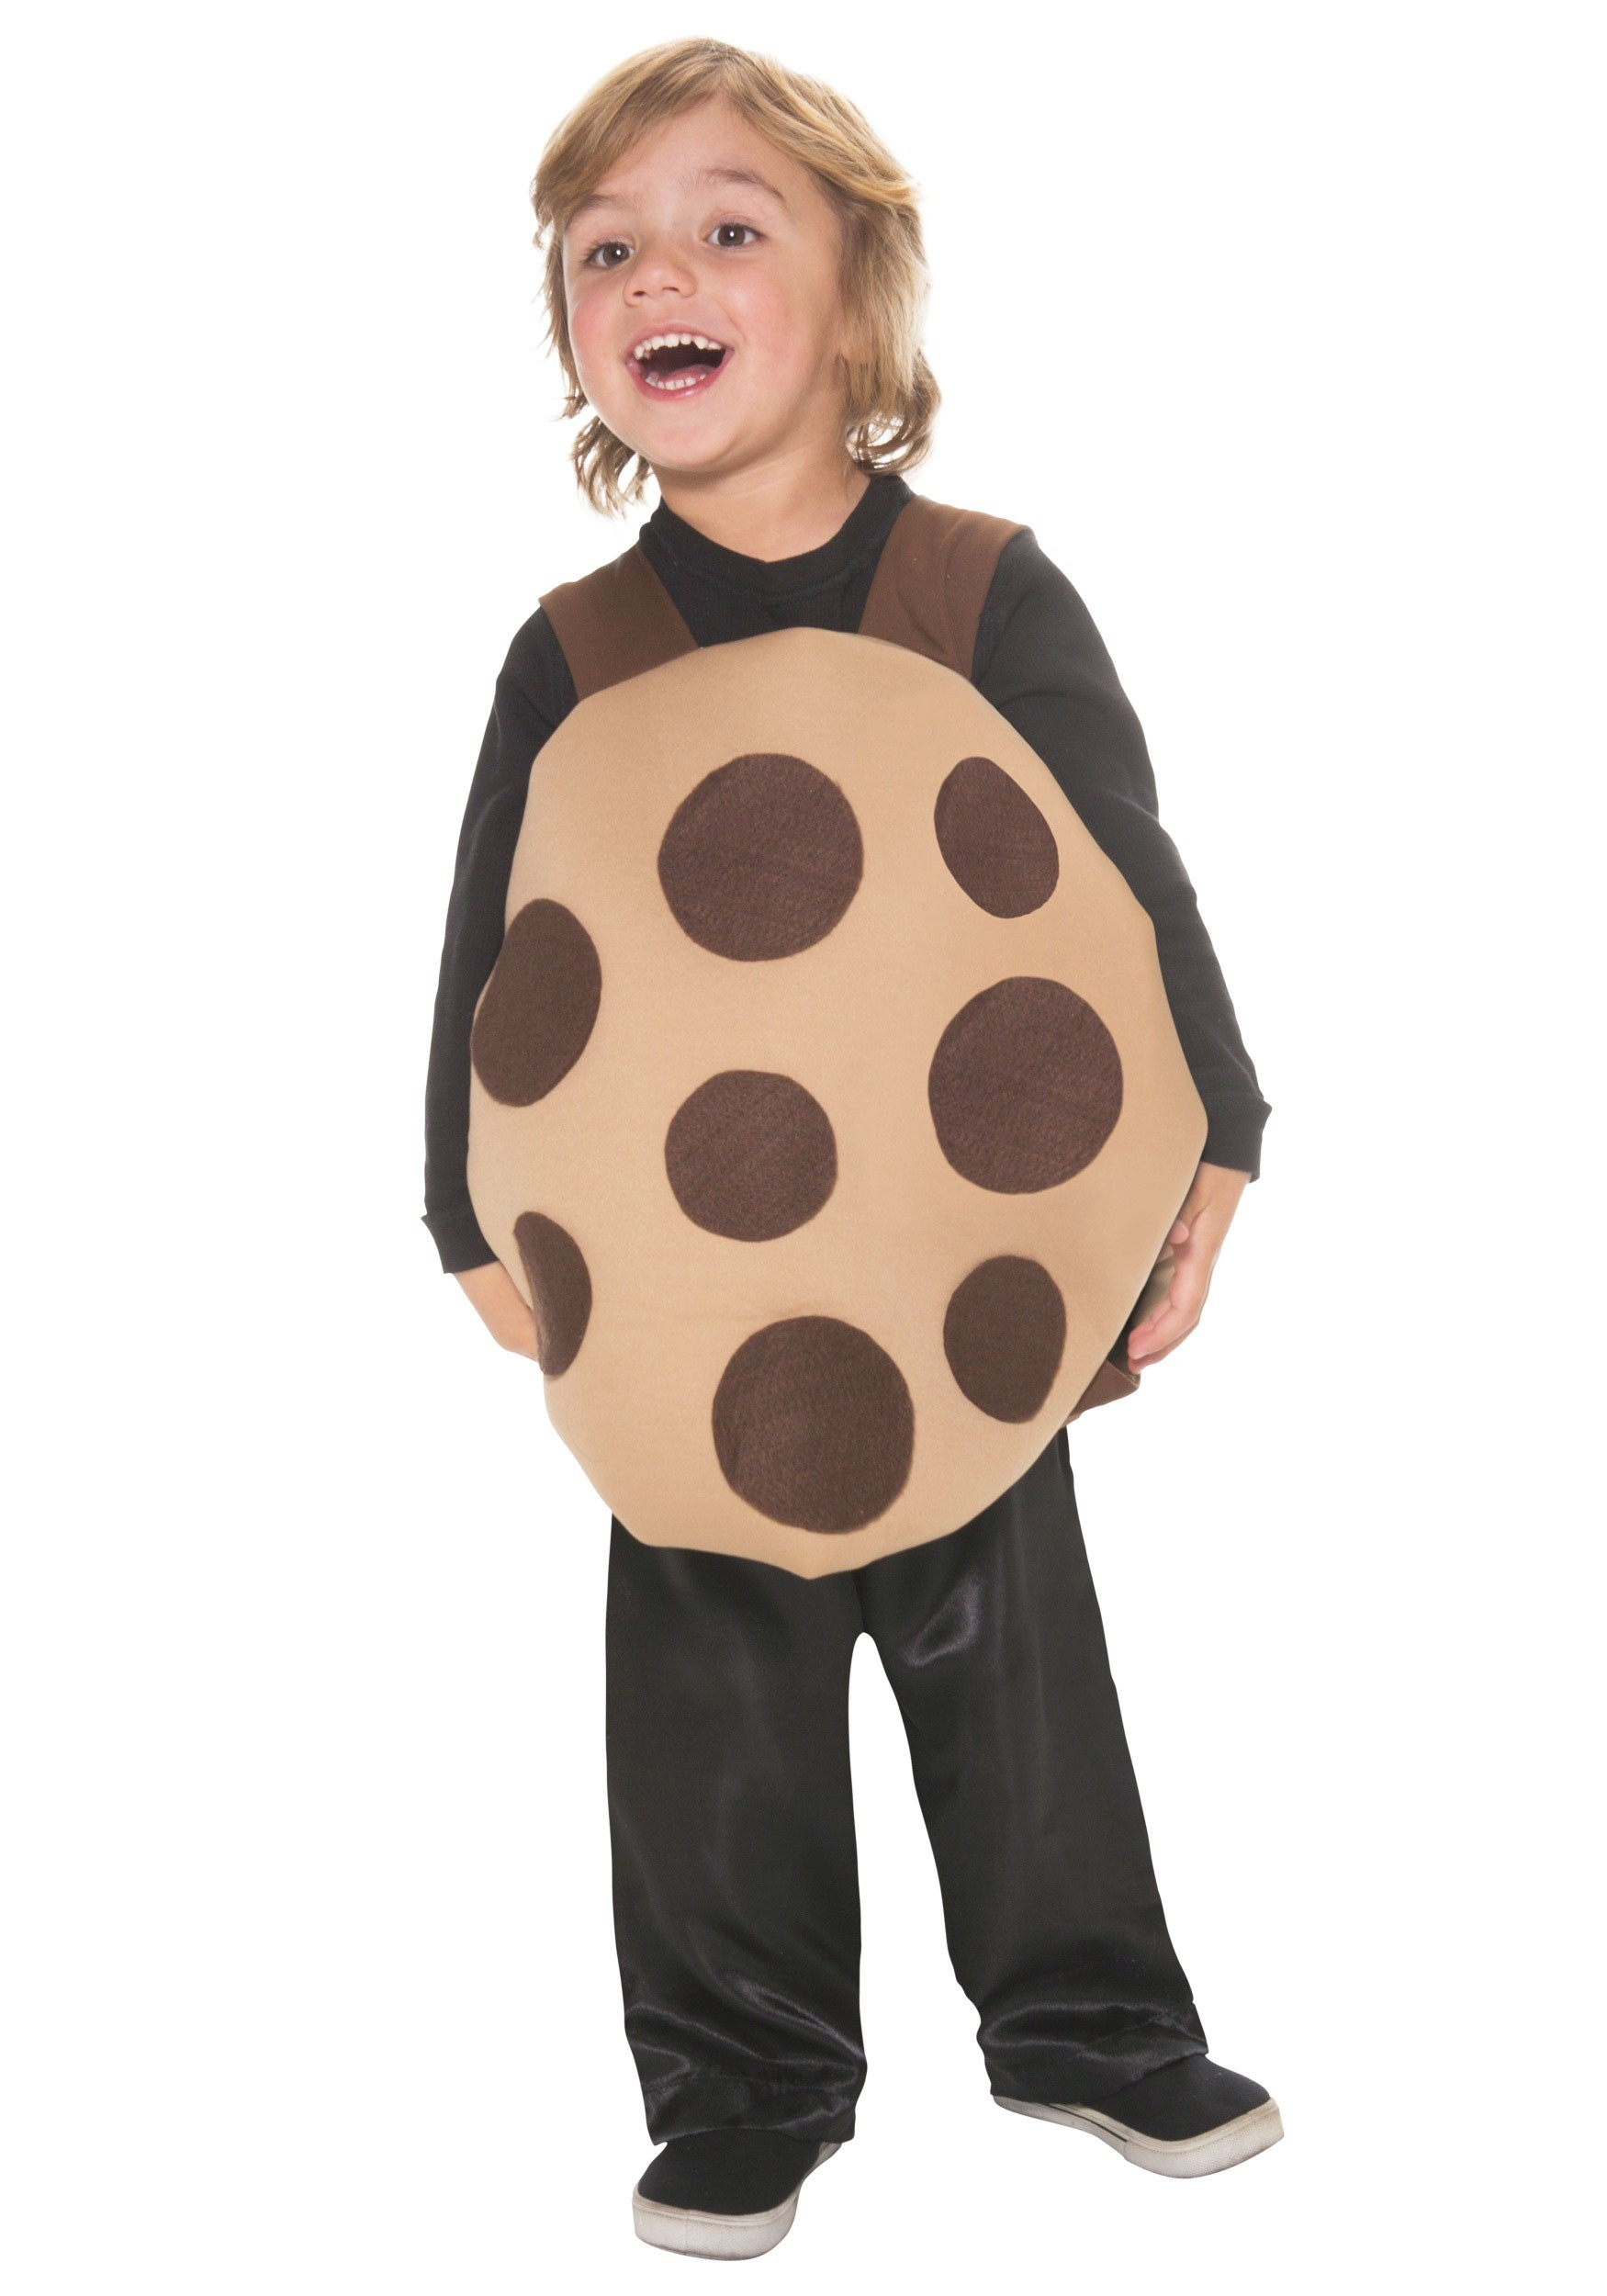 Cookies Halloween Costumes
 Toddler Chocolate Chip Cookie Costume